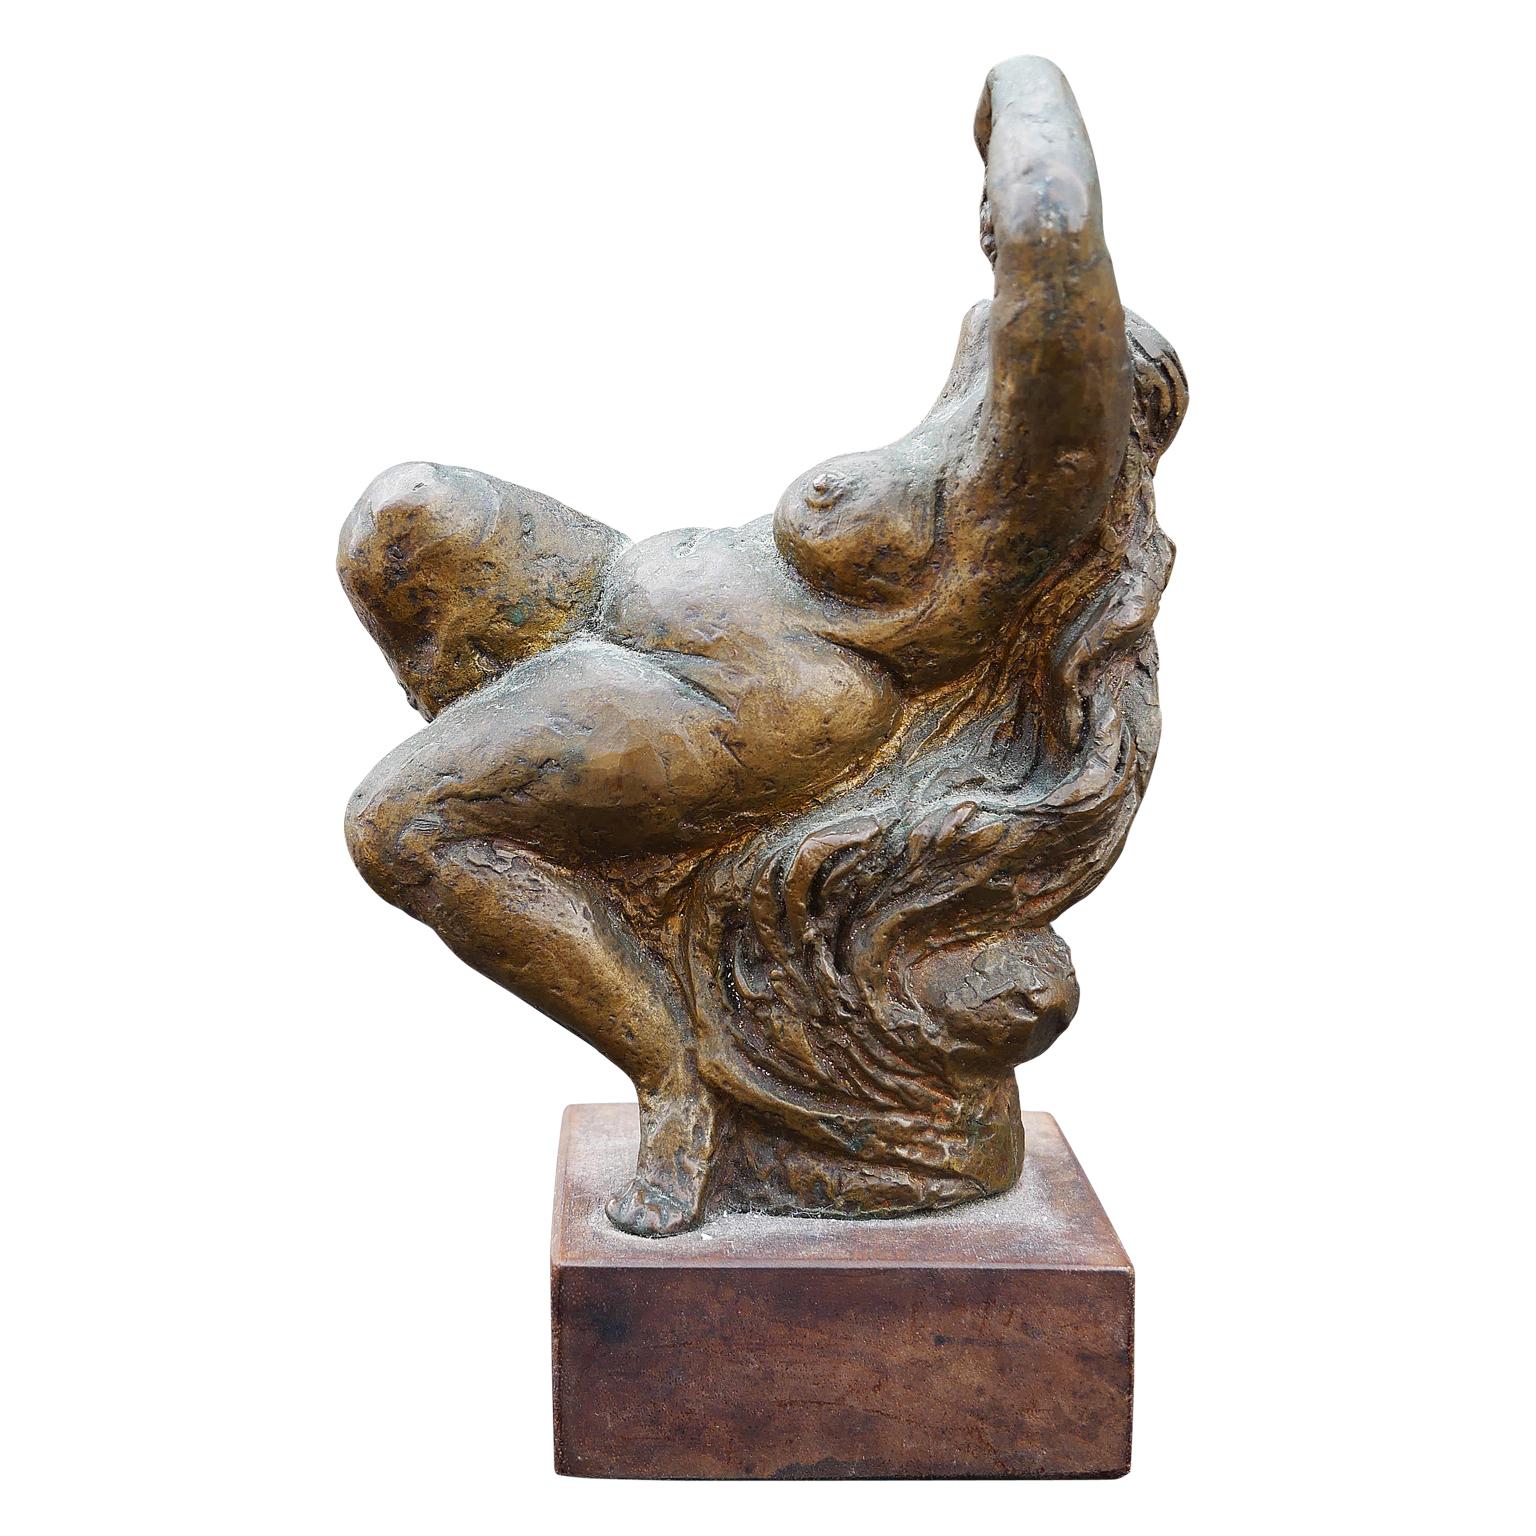 Modern abstract figurative sculpture of a nude woman by the artist James Kearns. The work features a reclining female figure with long flowing hair relaxing and eating grapes. Signed by the artist in the cast on the back of the pillow the woman is